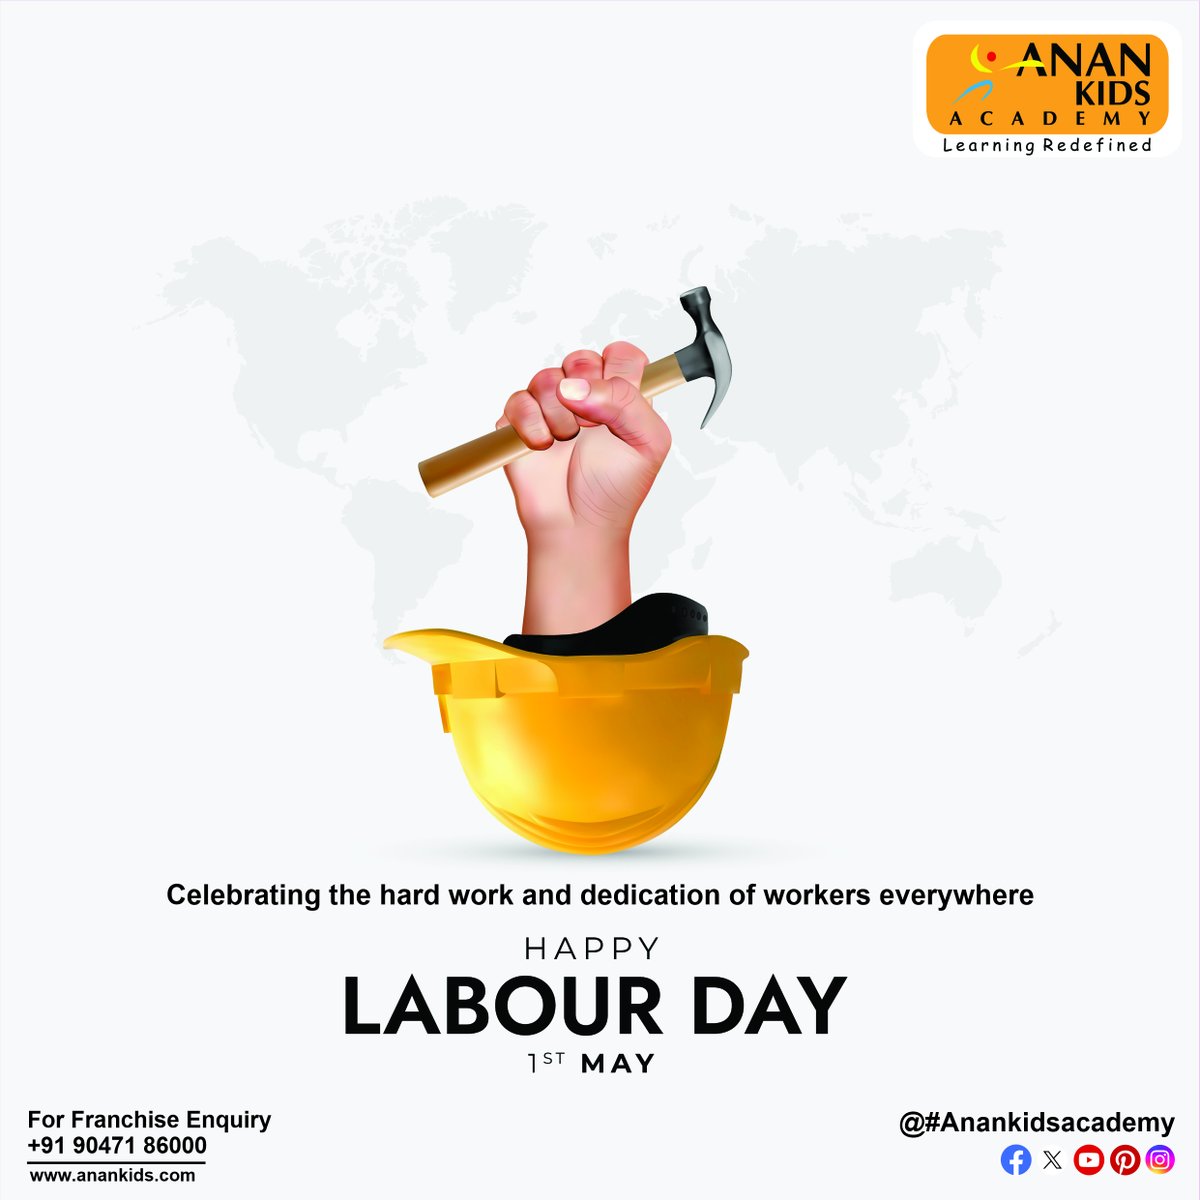 Here's to honoring the sweat, grit, and determination that fuel progress. Happy Labor Day to all hardworking souls! 

#LabourDay #WorkEthic #EverydayWork #Dedication #Progress #HardWorkPaysOff #CelebrateWork #LabourDay2024 #WorkingForABetterFuture #AnankidsAcademy